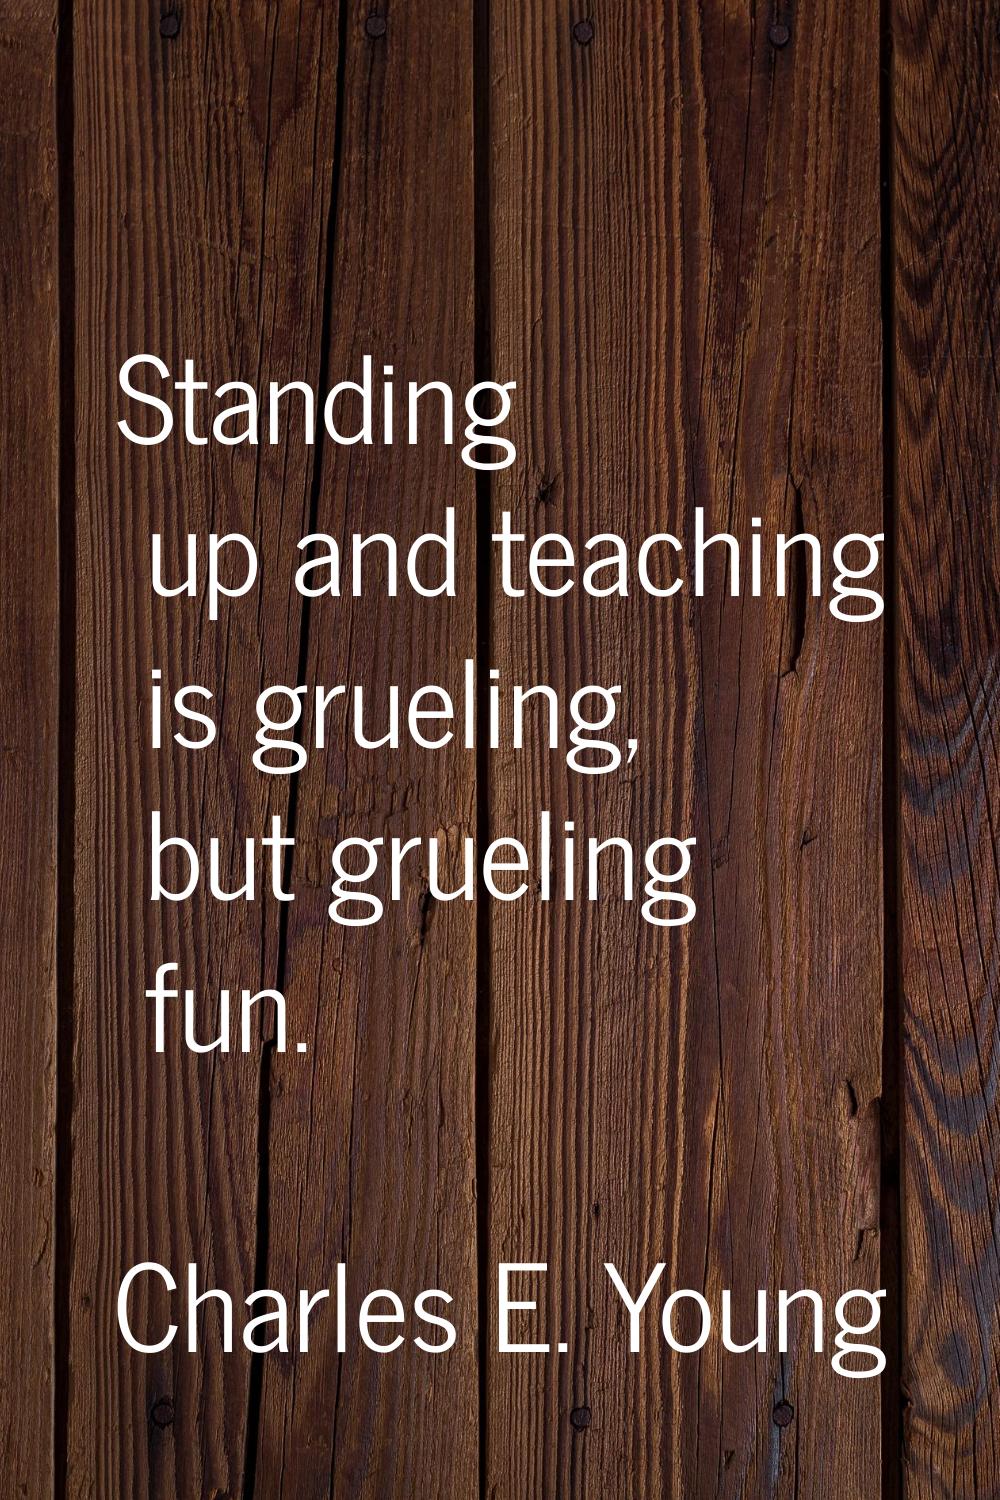 Standing up and teaching is grueling, but grueling fun.